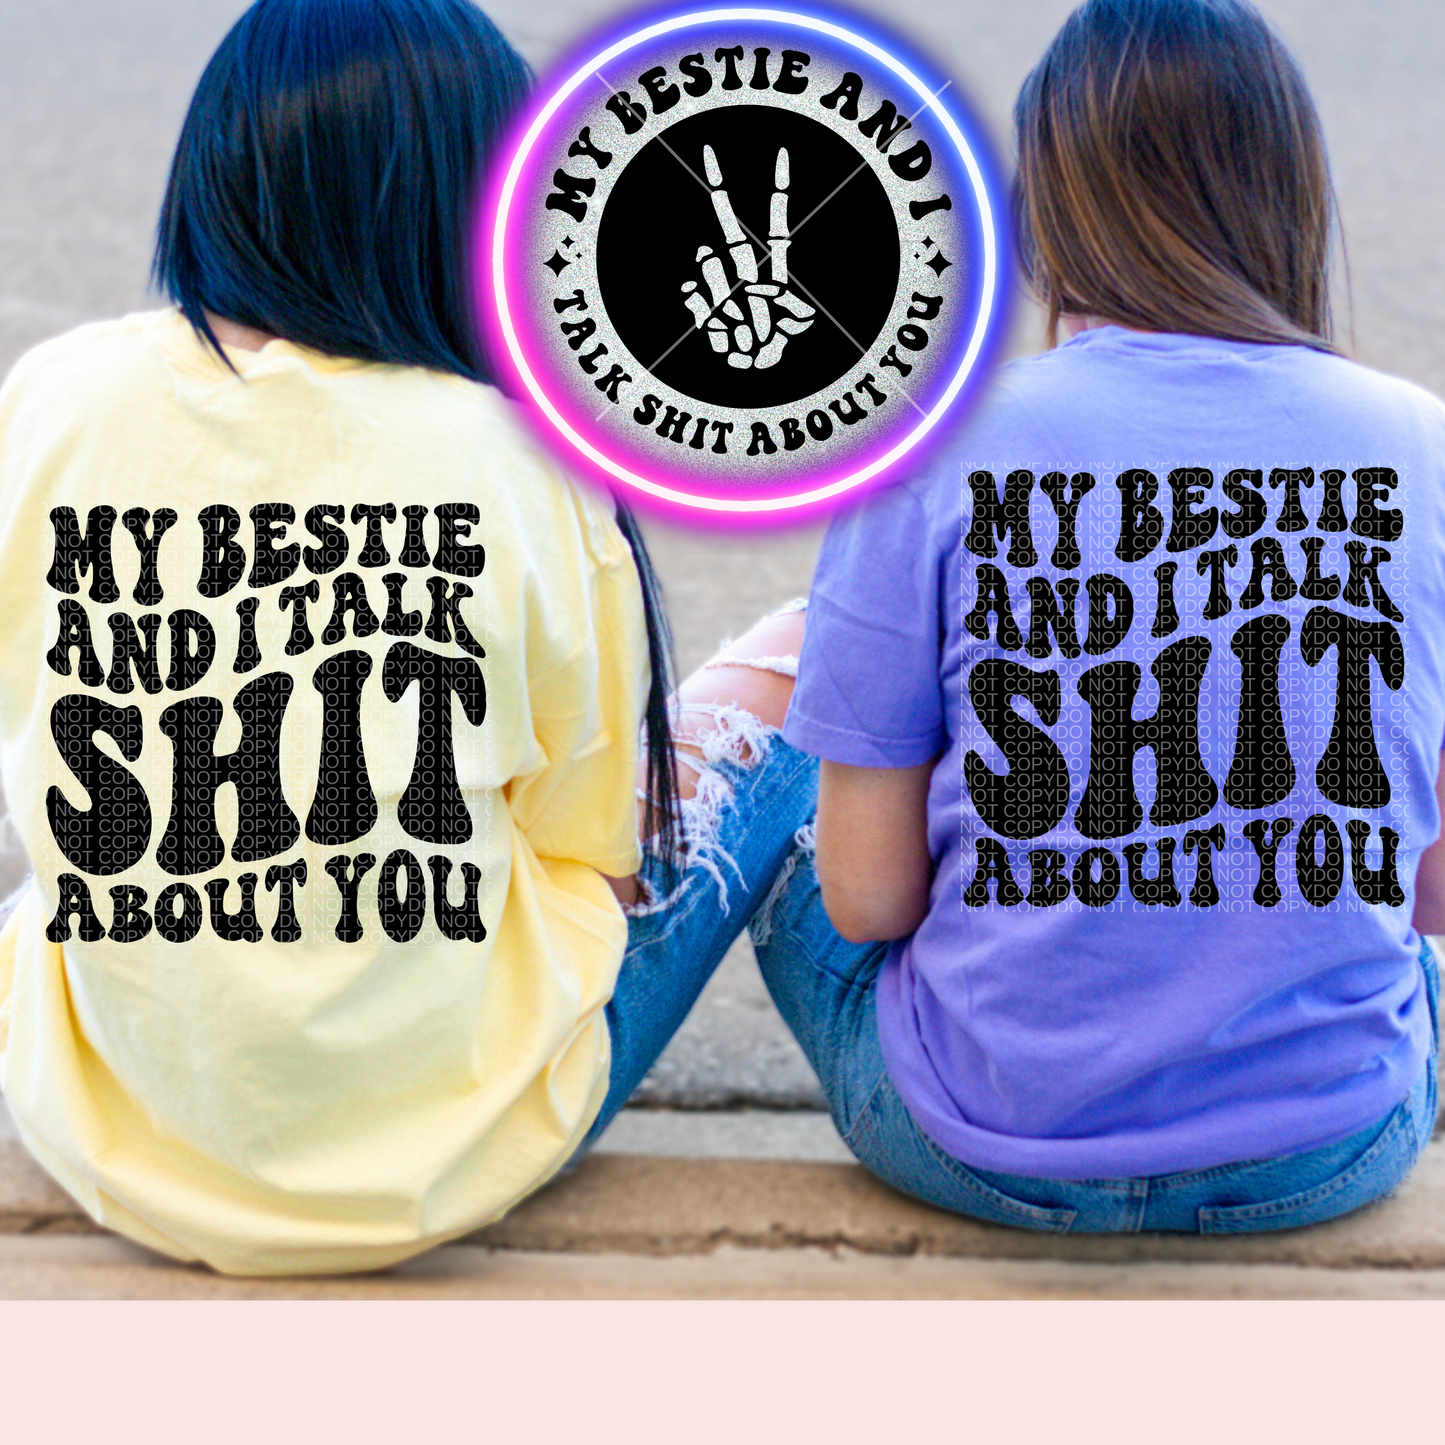 My Bestie and I Talk Shit About You Comfort Colors Tee*